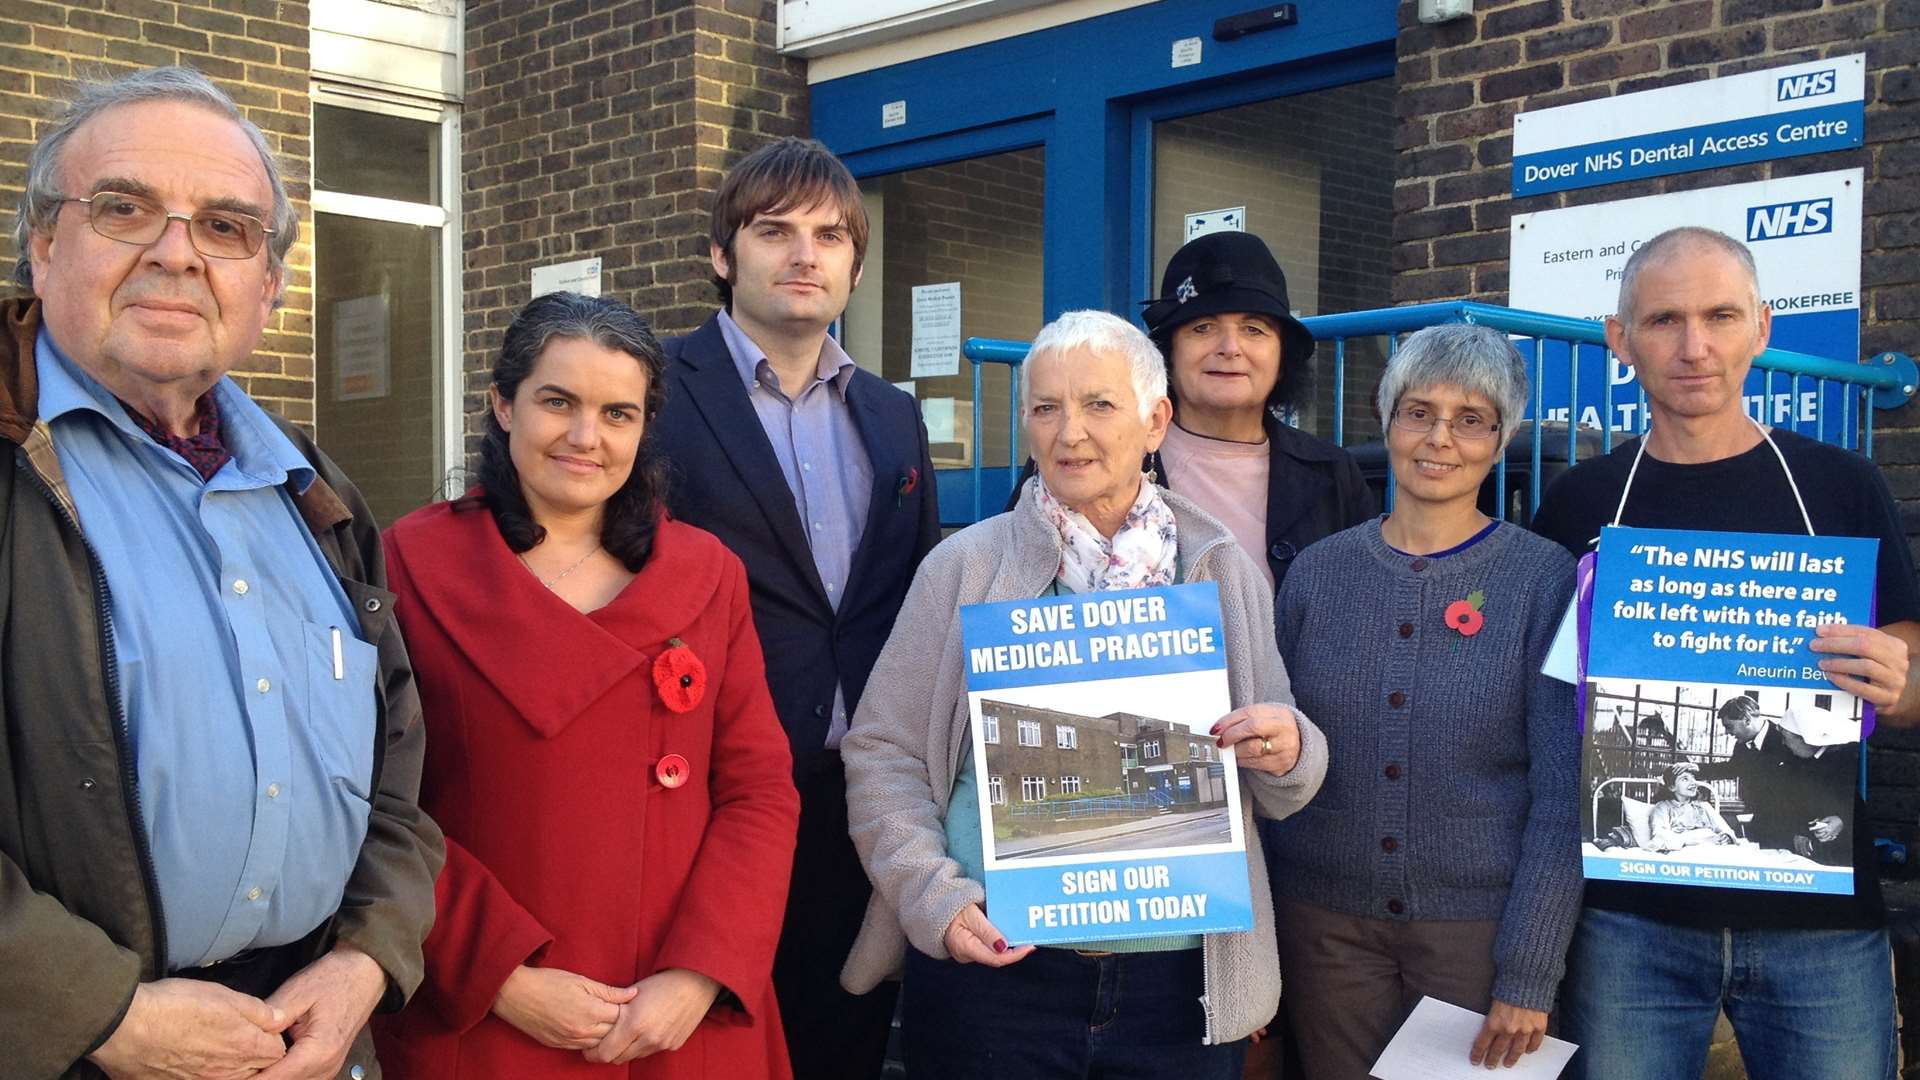 A protest took place in a bid to save the practice - but it is now shut